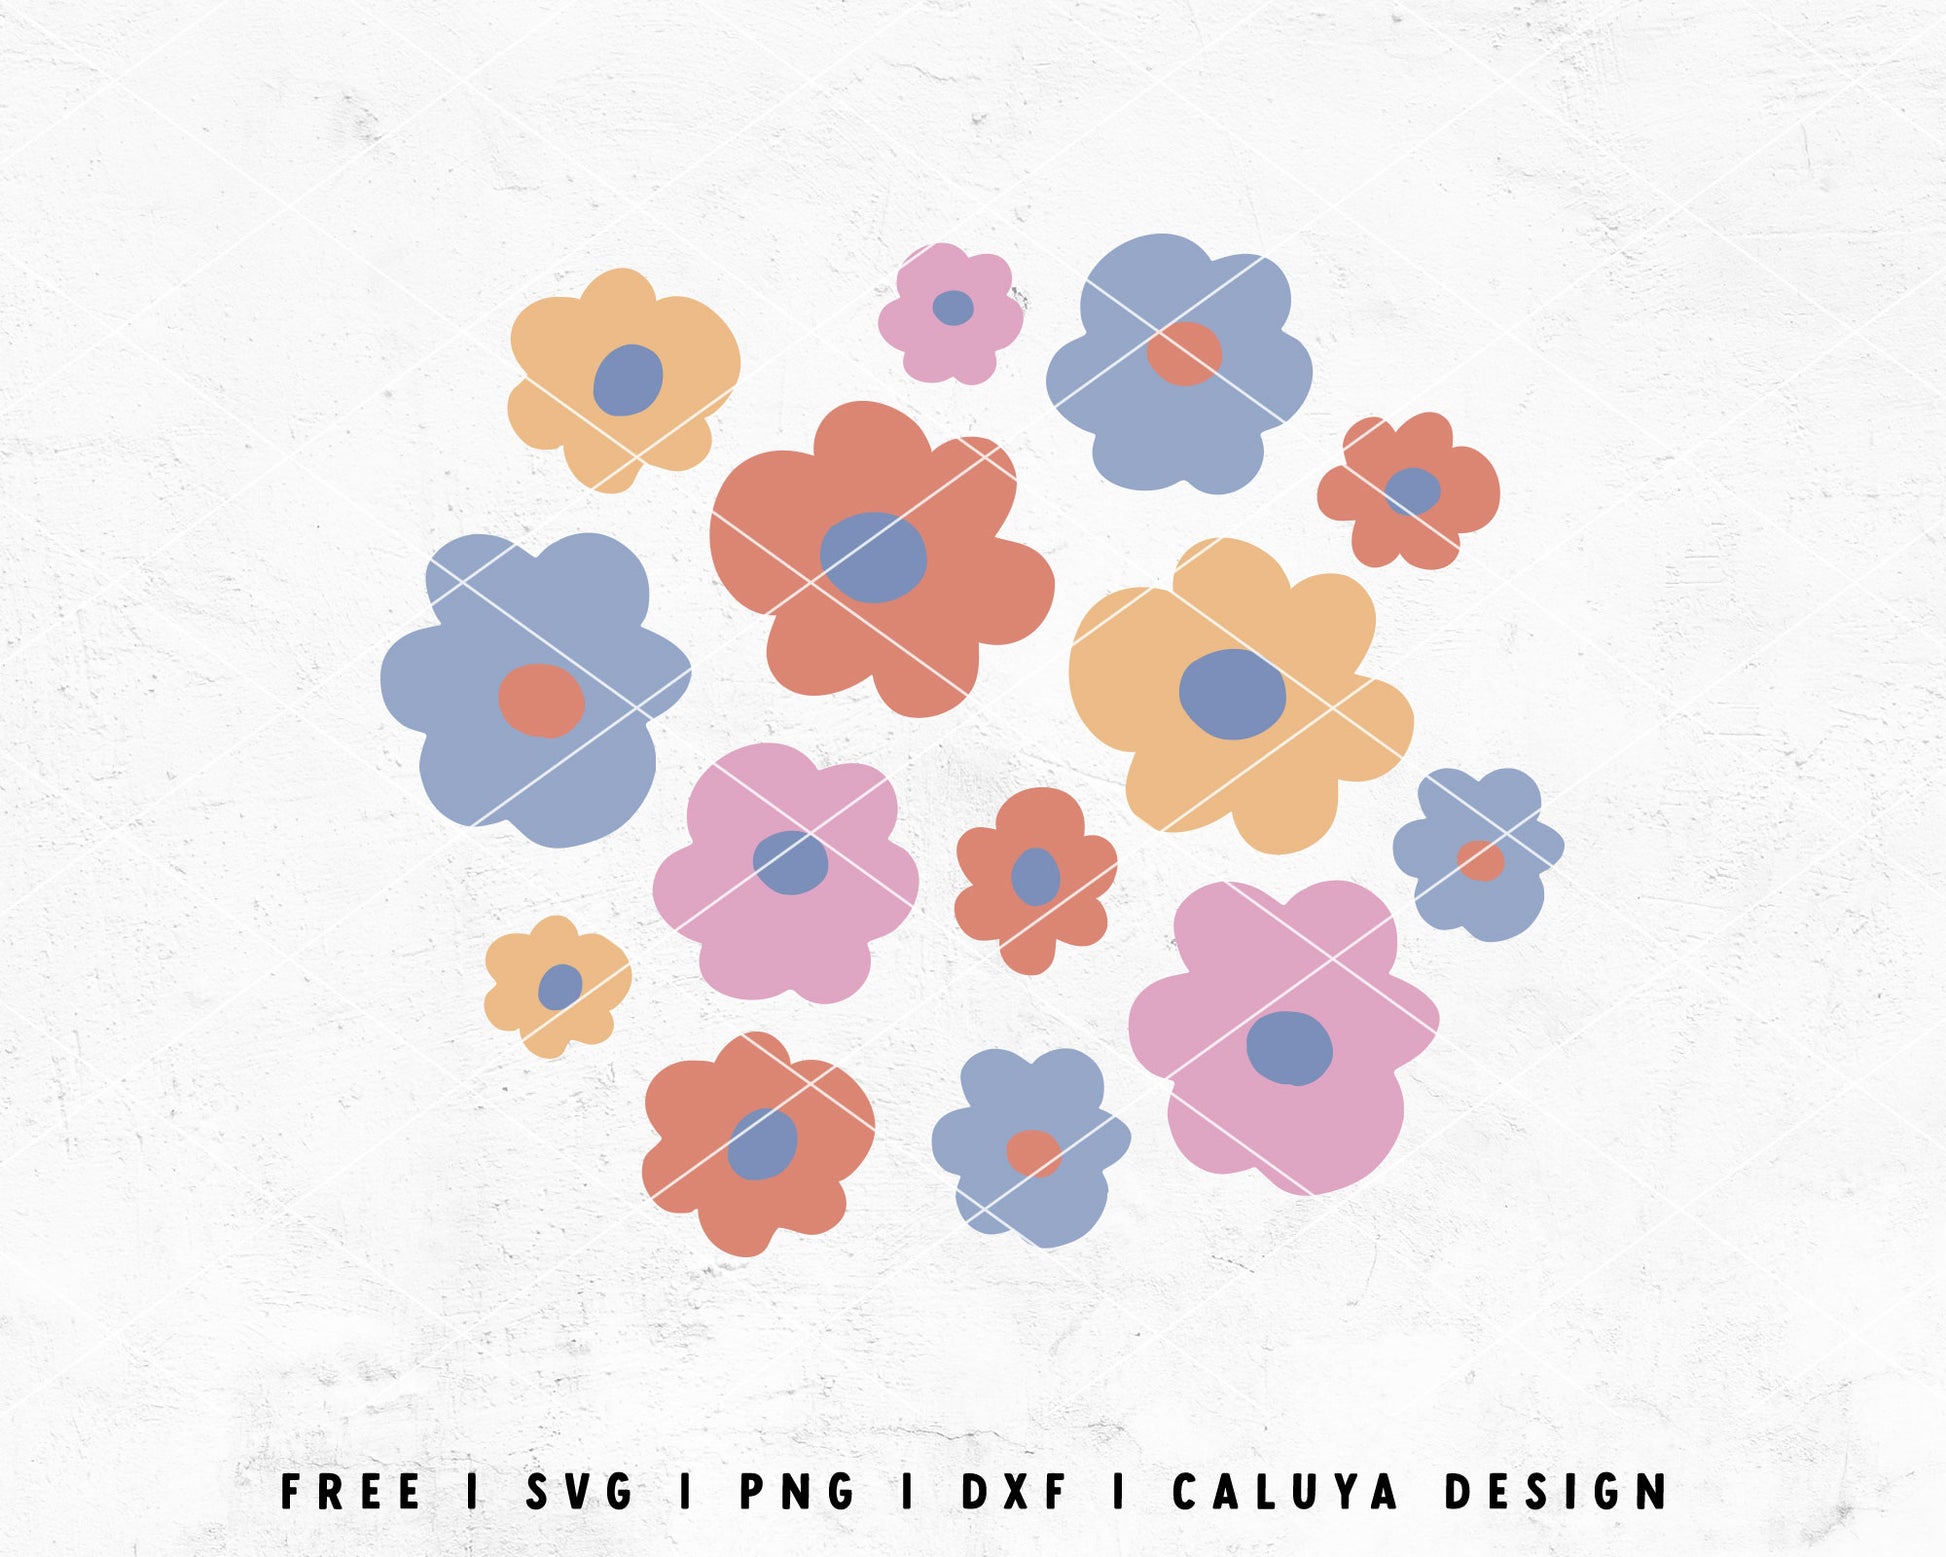 FREE Abstract Flower SVG | Matisse Flower SVG Cut File for Cricut, Cameo Silhouette | Free SVG Cut File